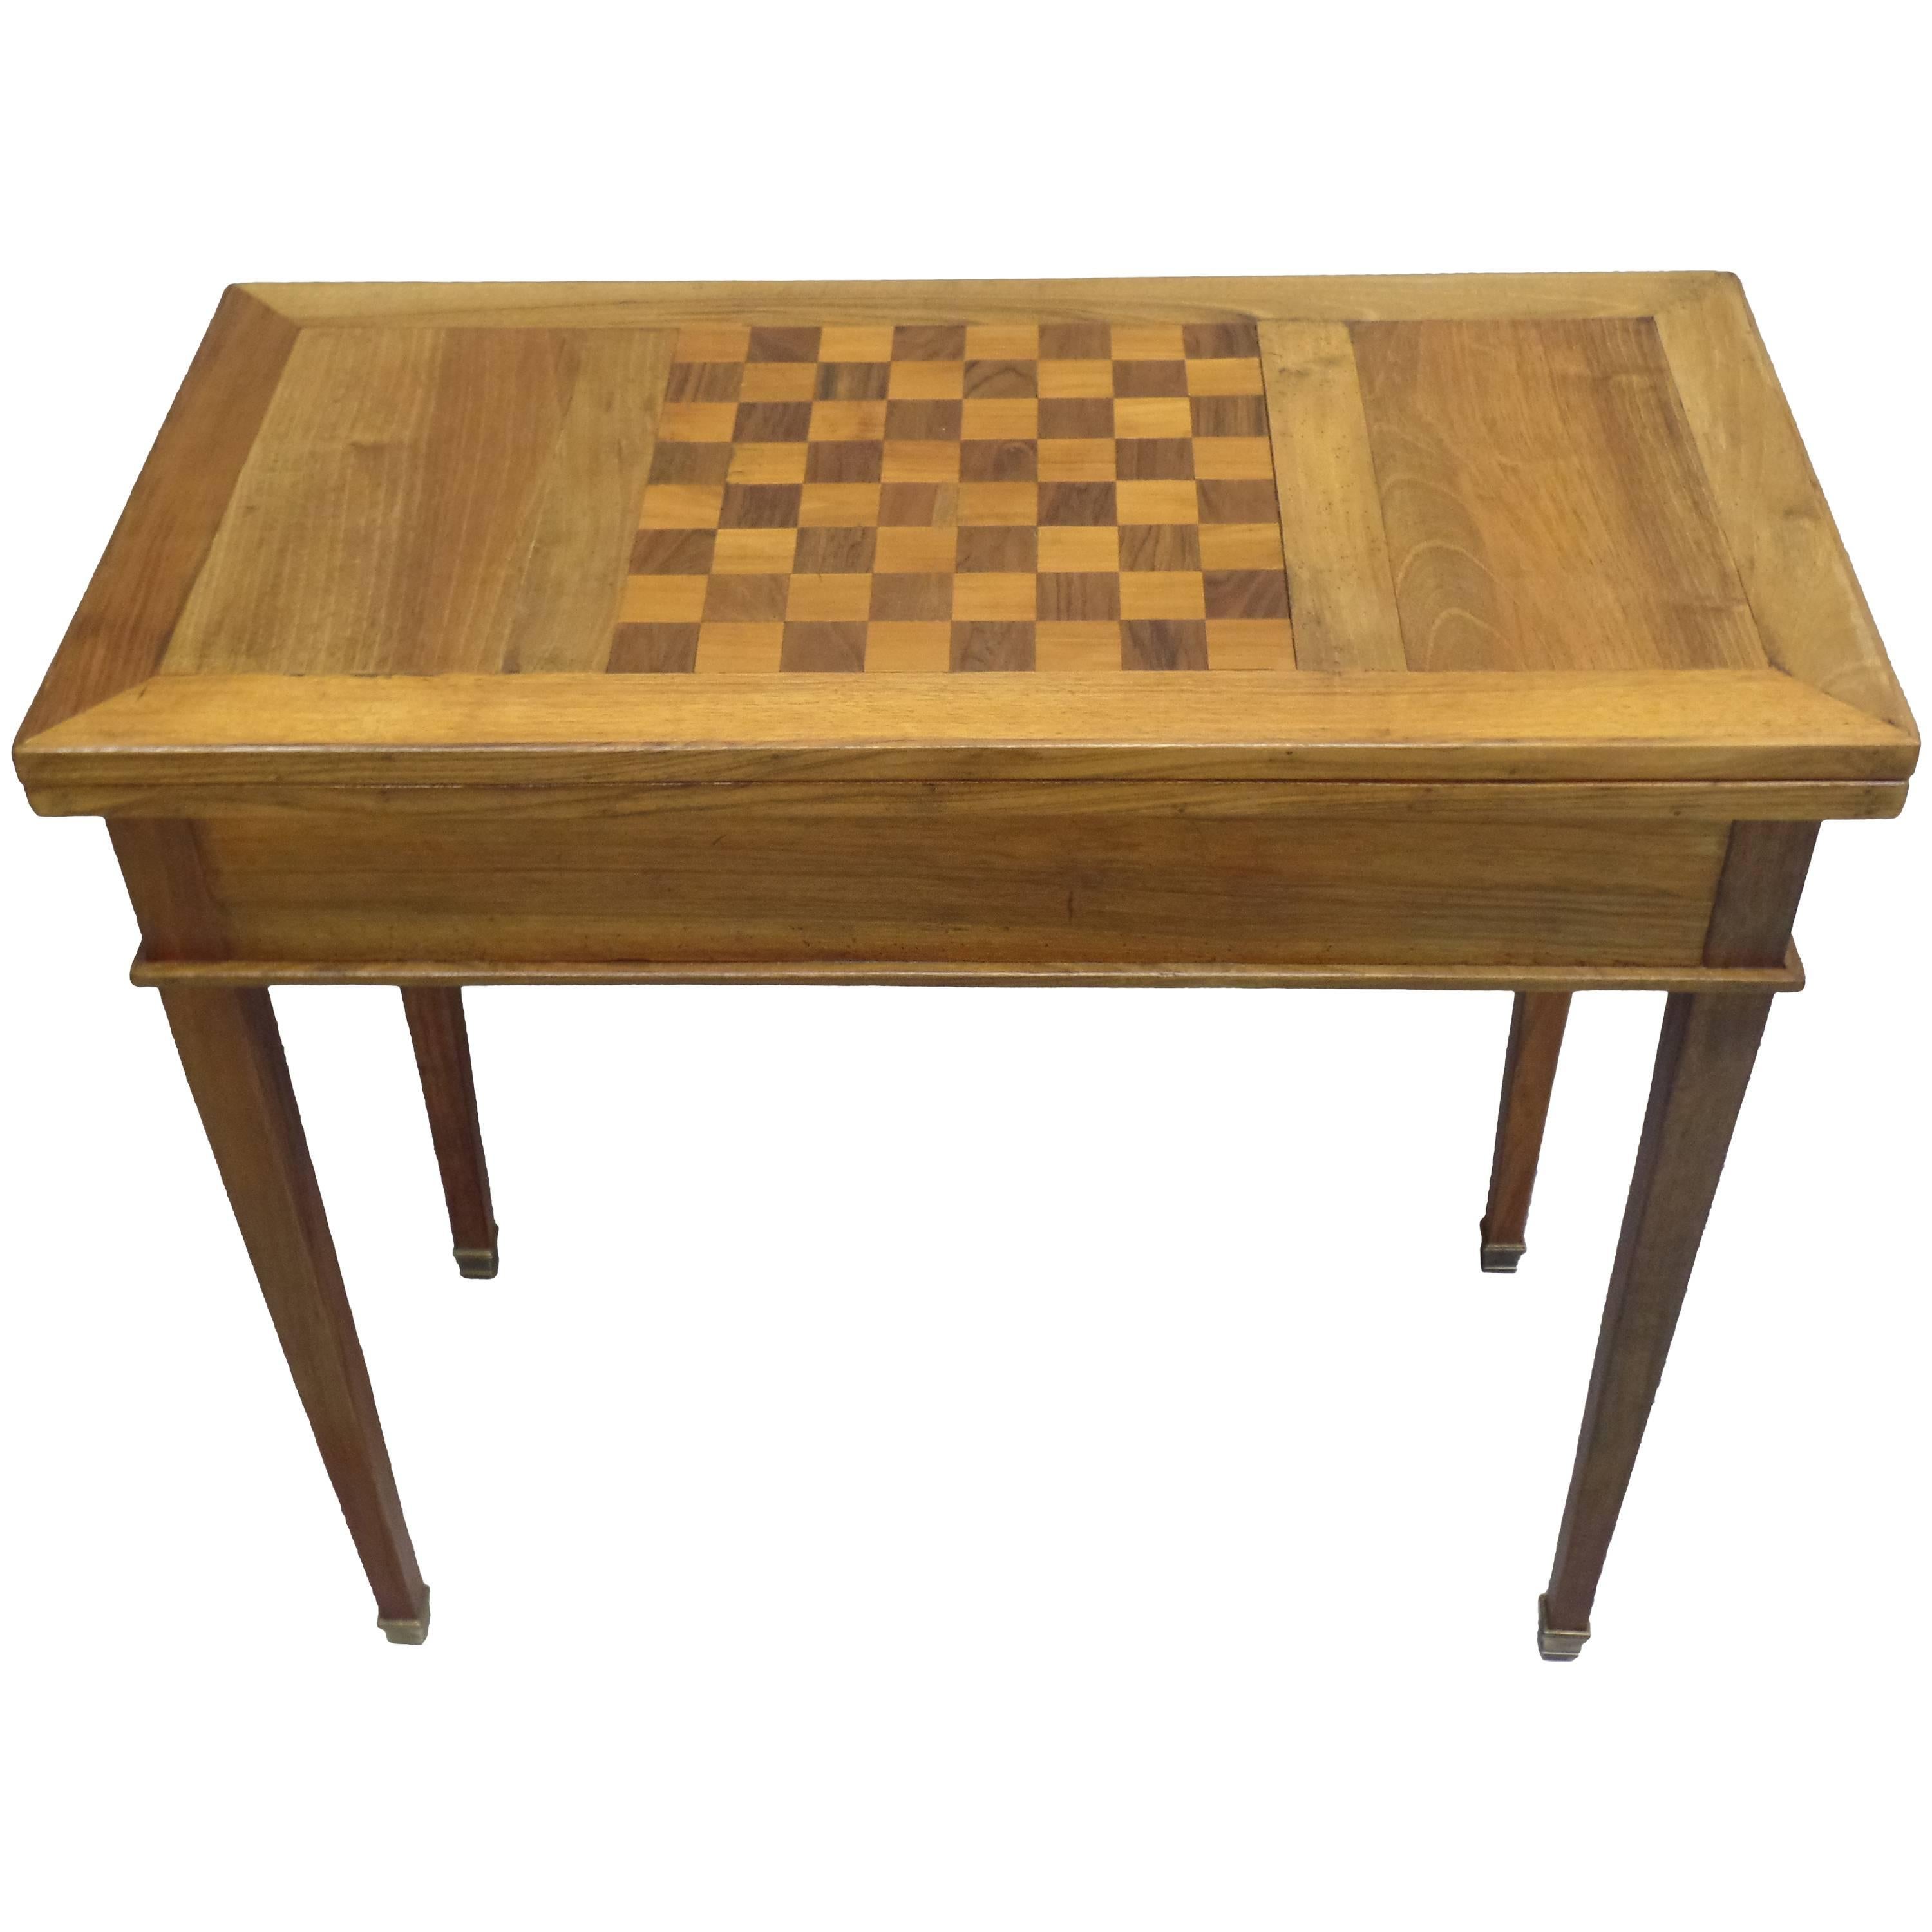 French Modern Neoclassical Louis XVI Game Table or Writing Desk by Maison Jansen